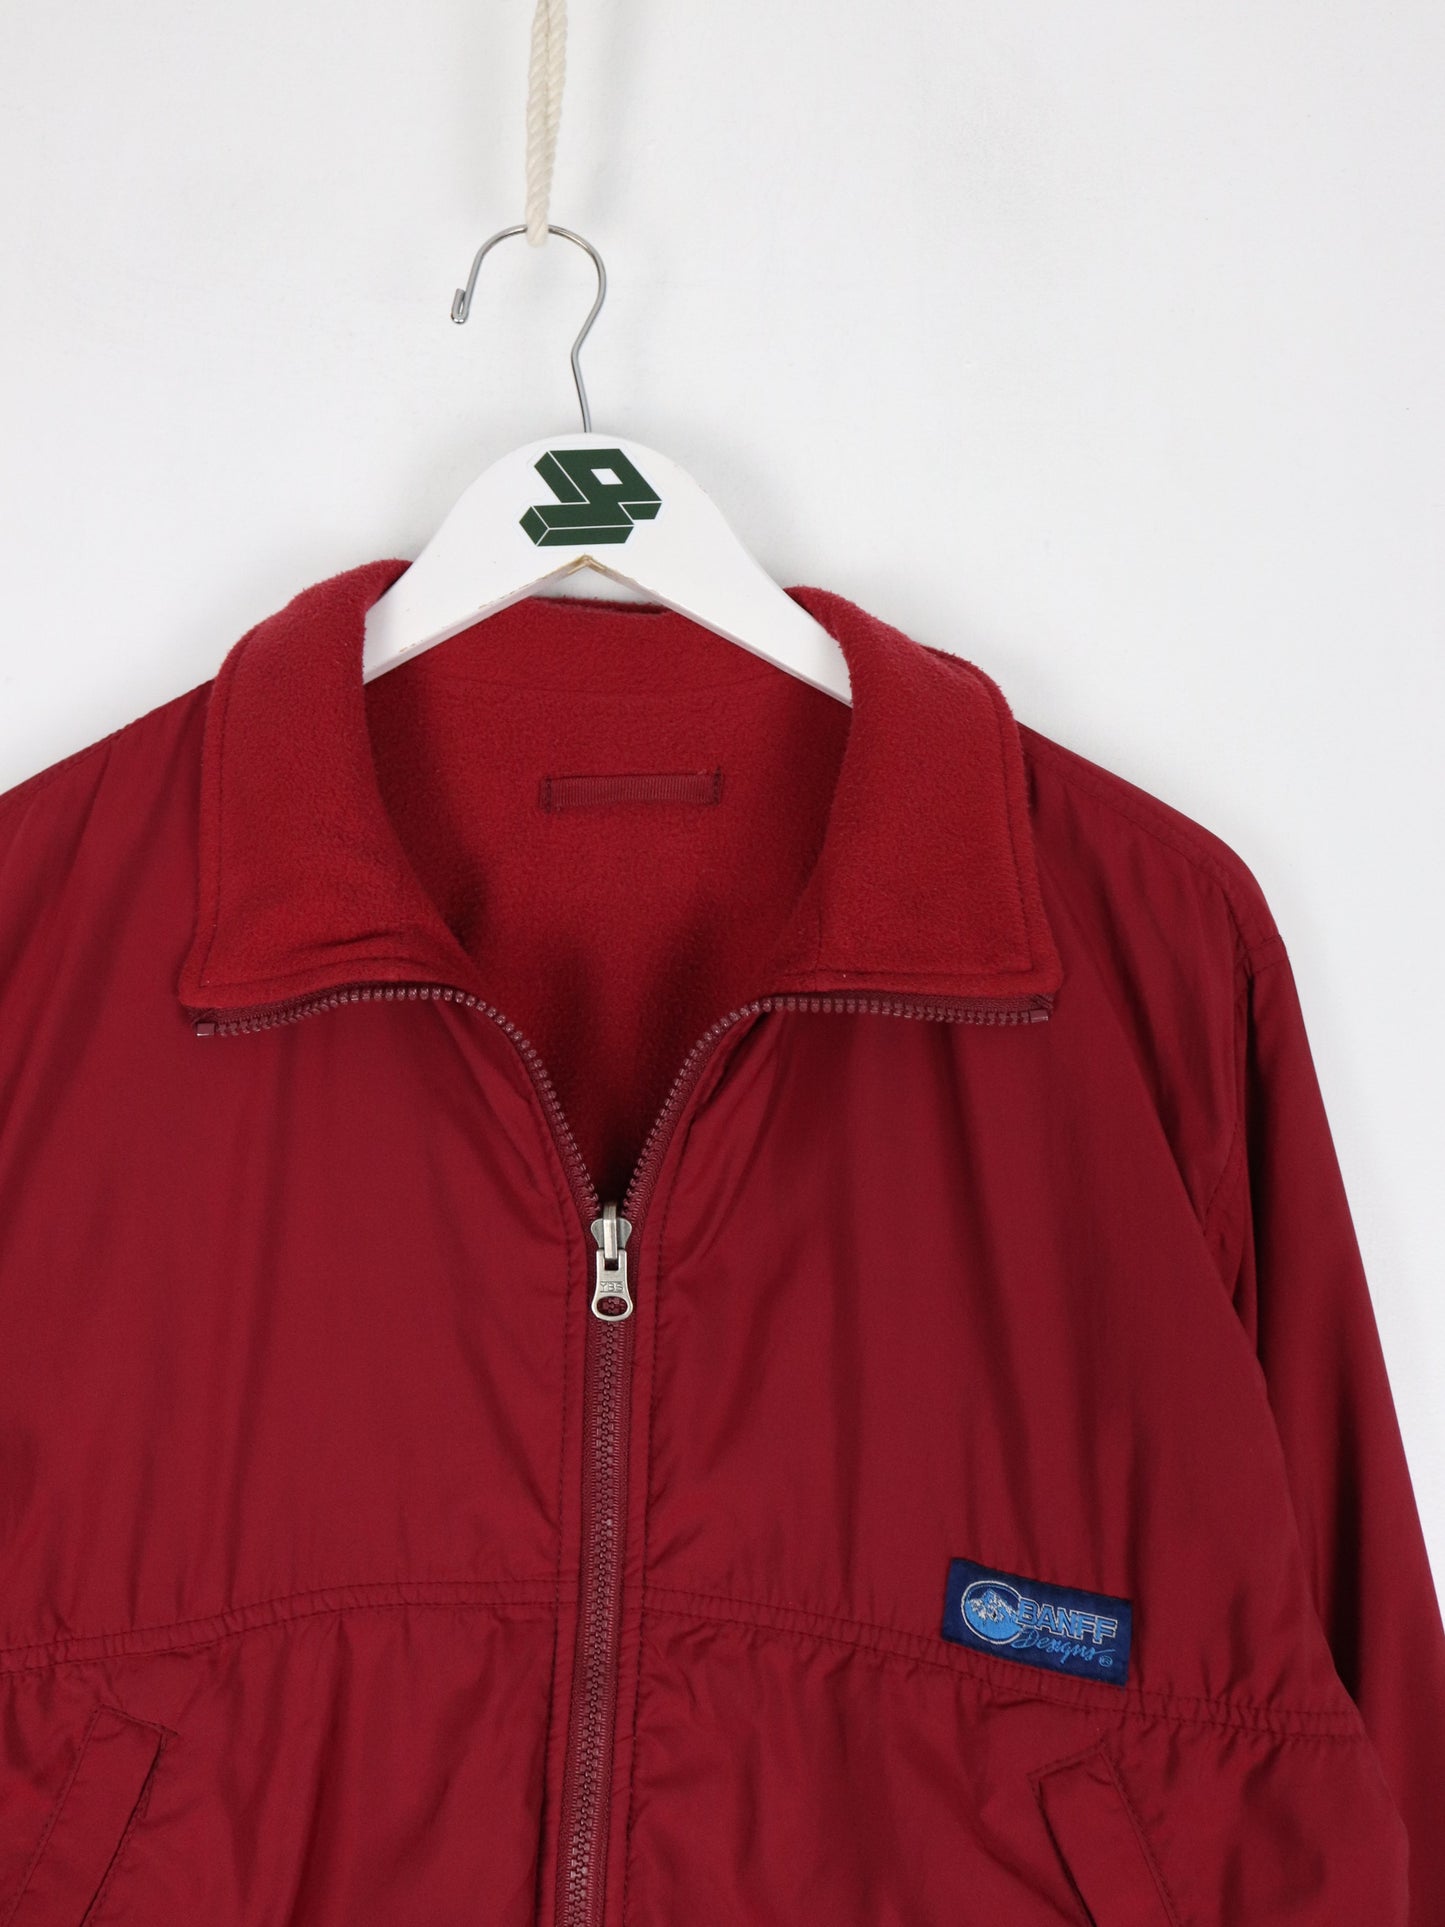 Vintage Banff Jacket Womens Small Red Reversible Fleece Outdoors